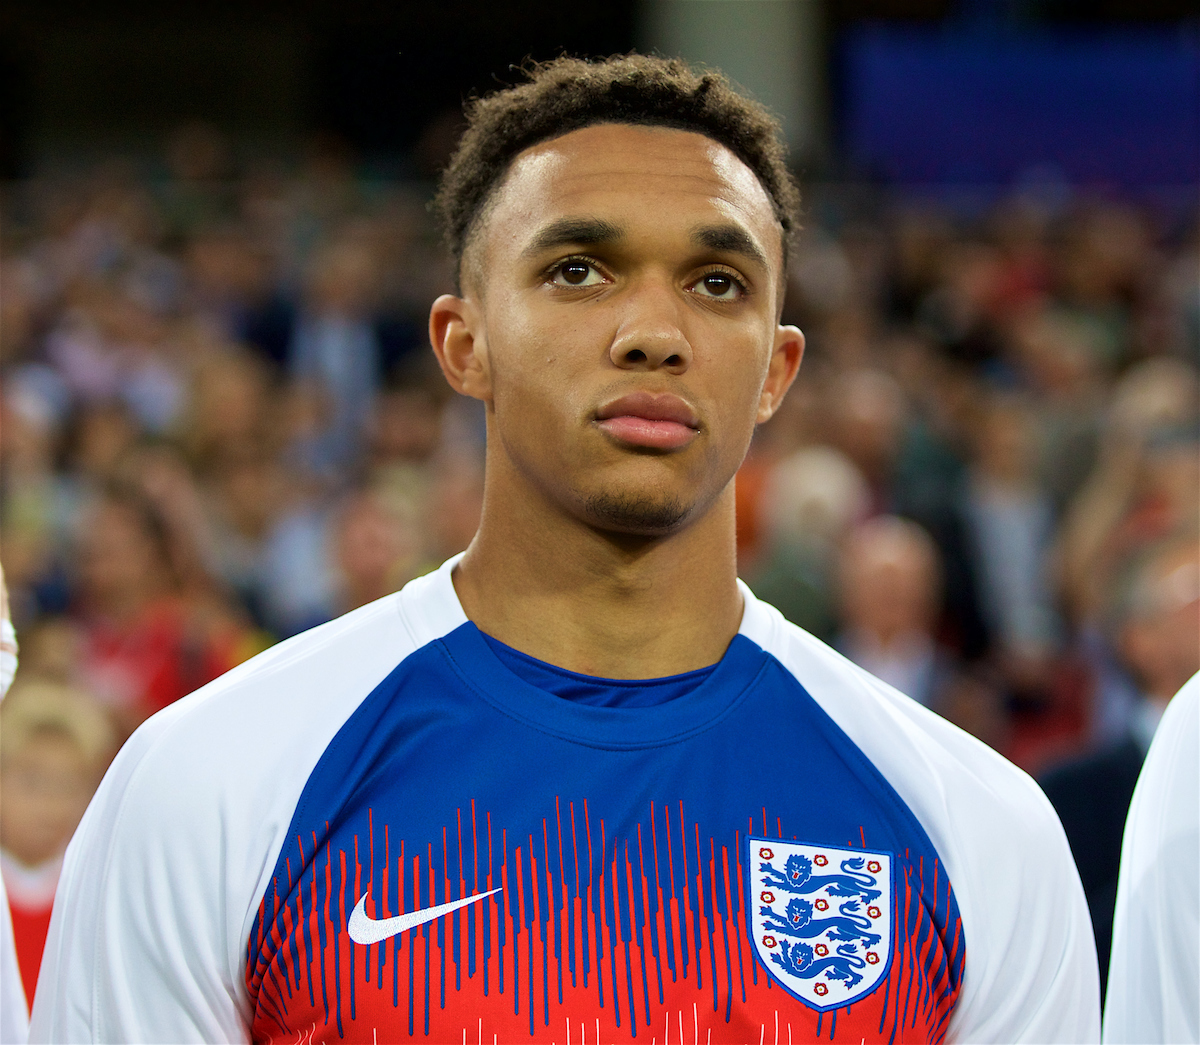 MOSCOW, RUSSIA - Tuesday, July 3, 2018: England's substitute Liverpool full-back Trent Alexander-Arnold on the bench before the FIFA World Cup Russia 2018 Round of 16 match between Colombia and England at the Spartak Stadium. (Pic by David Rawcliffe/Propaganda)